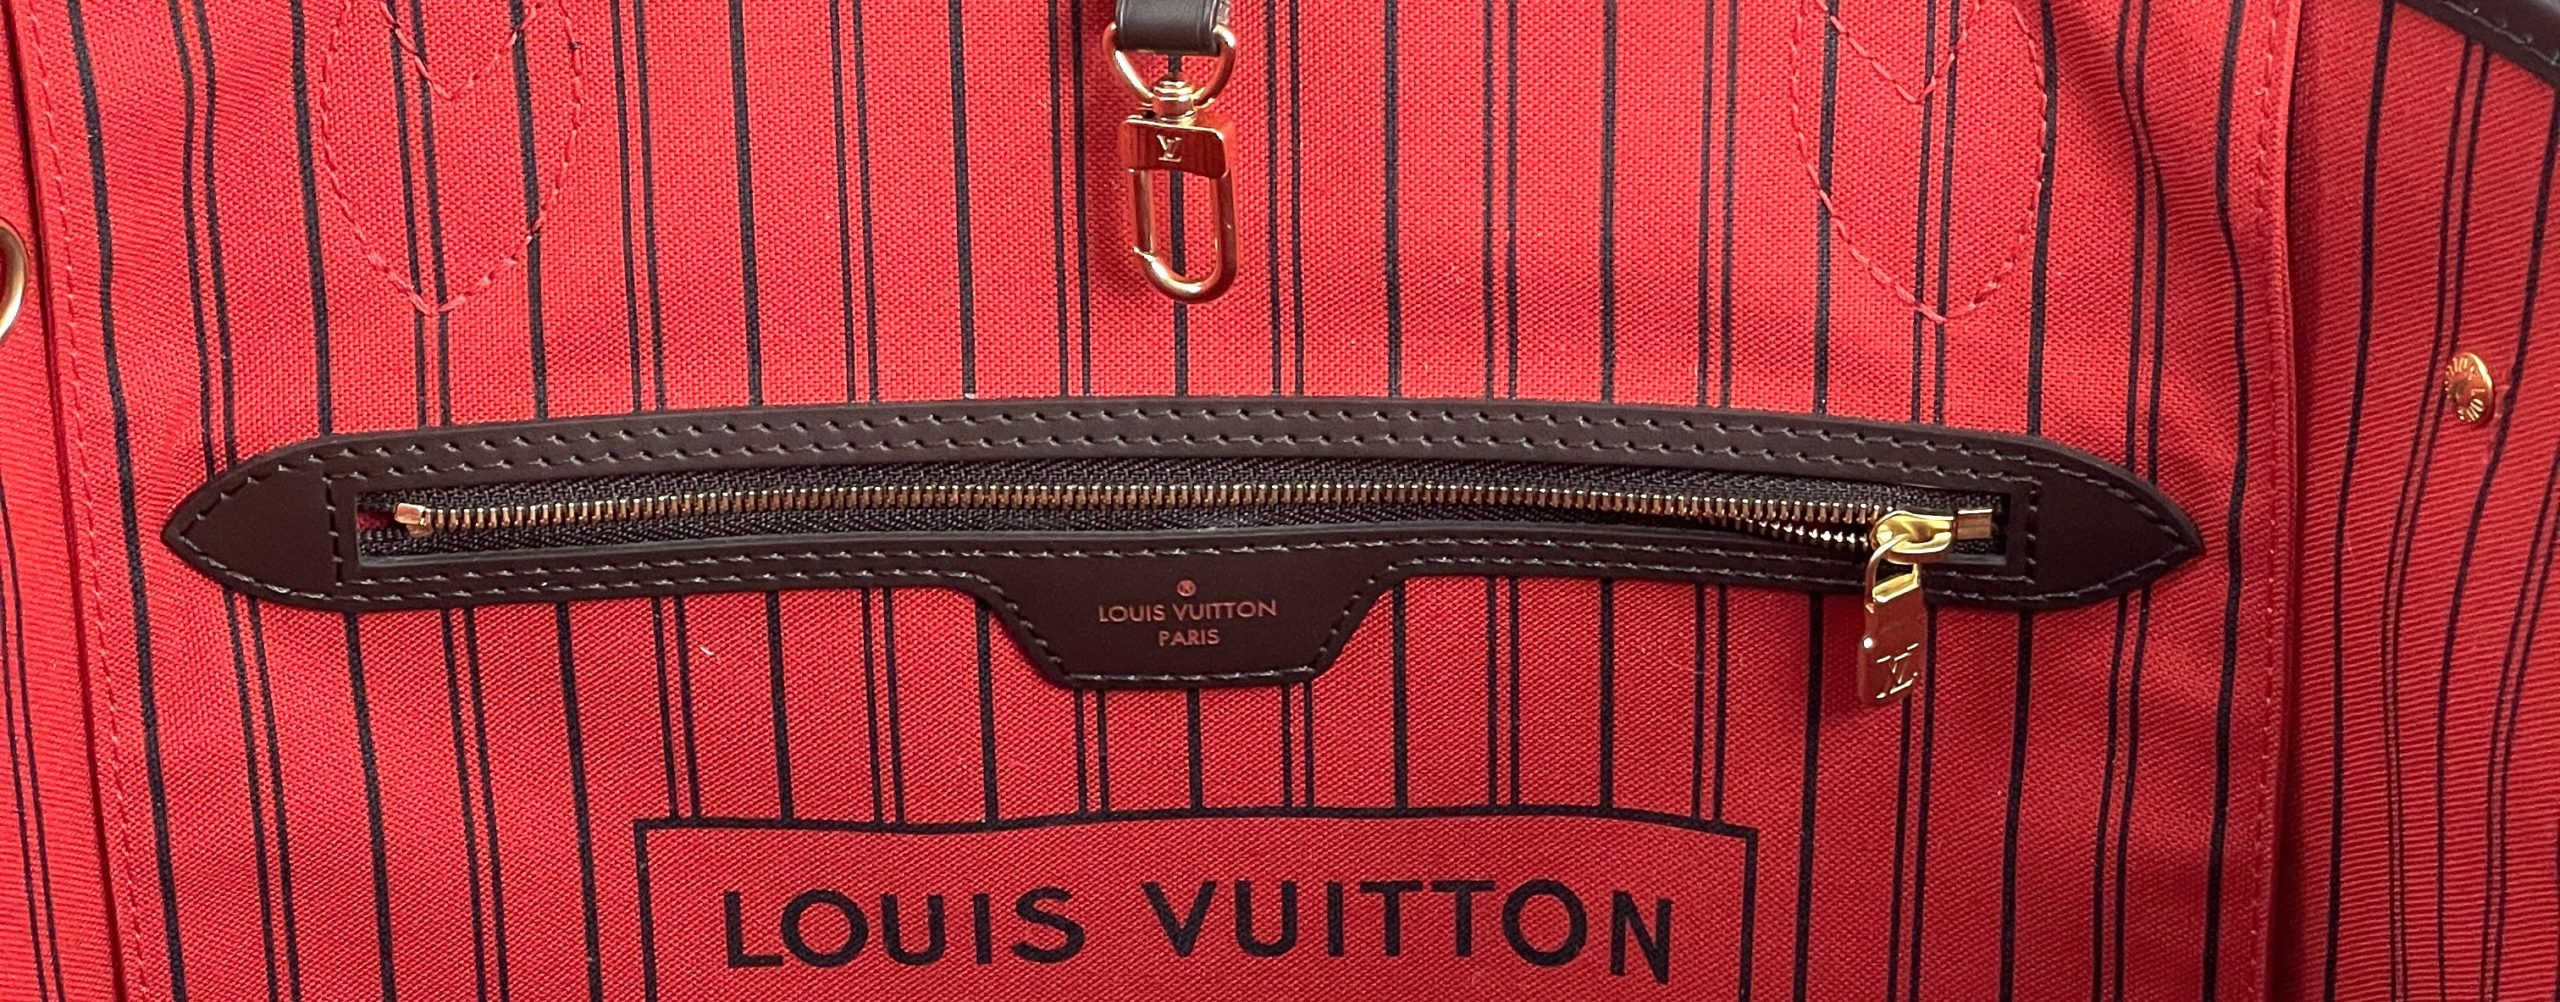 How To Spot A Fake Louis Vuitton Neverfull Giant - Brands Blogger